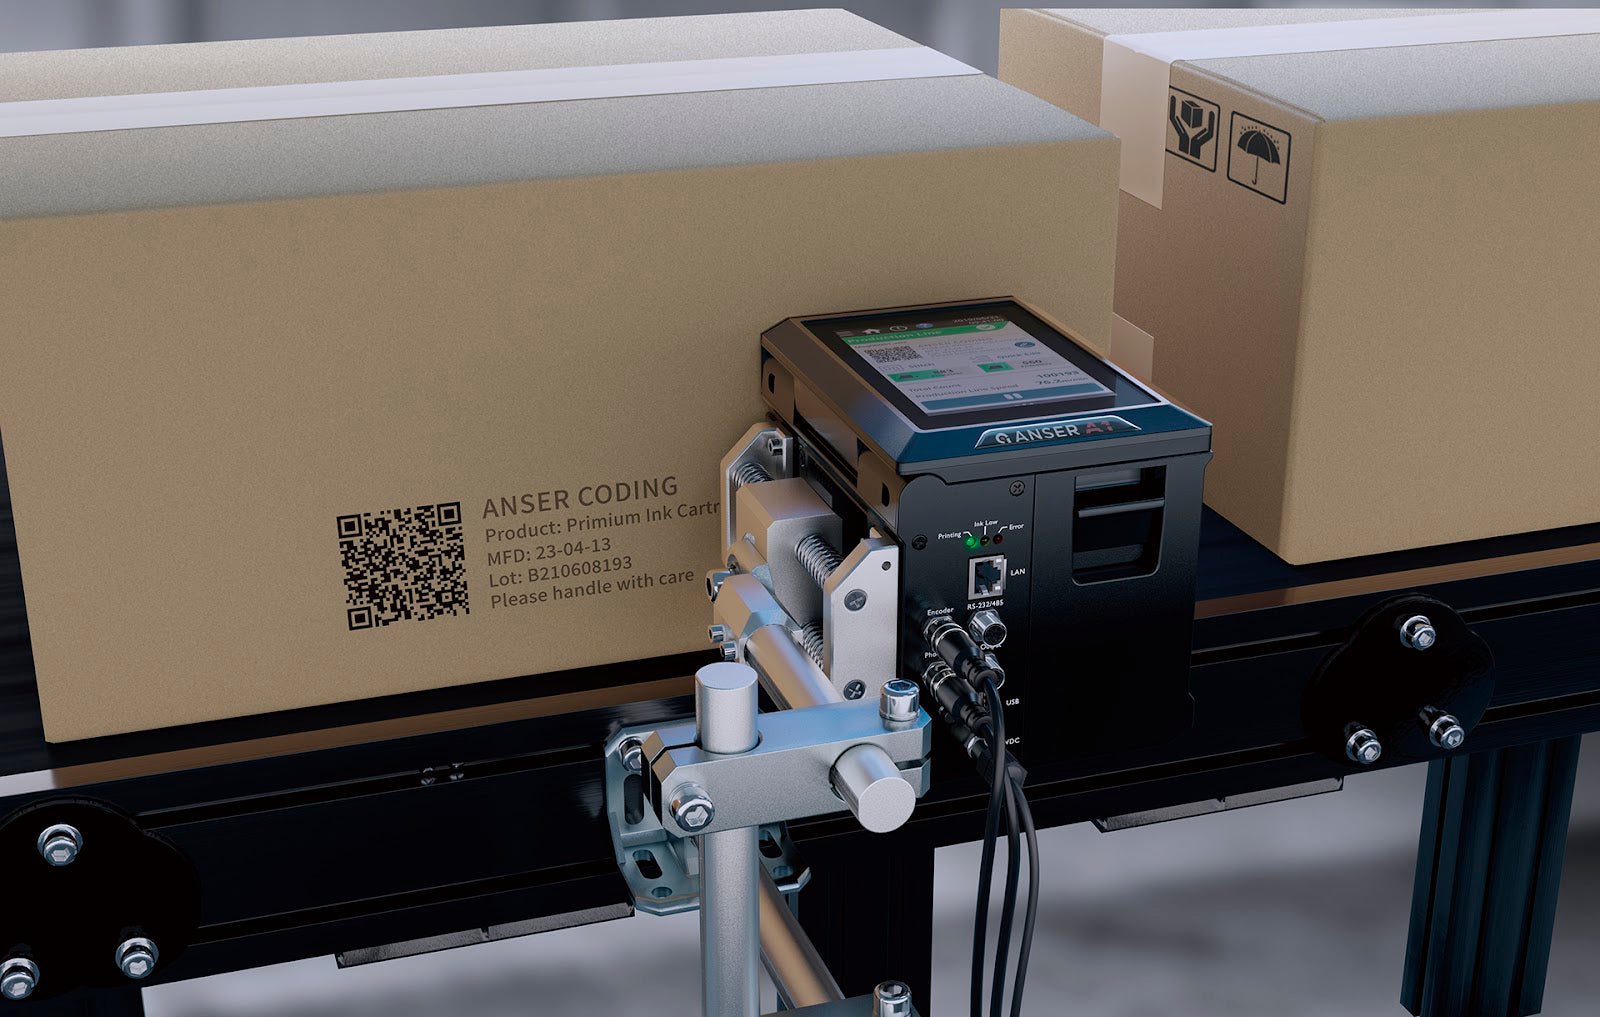 Picture of Anser A1 used for printing on cardboard boxes